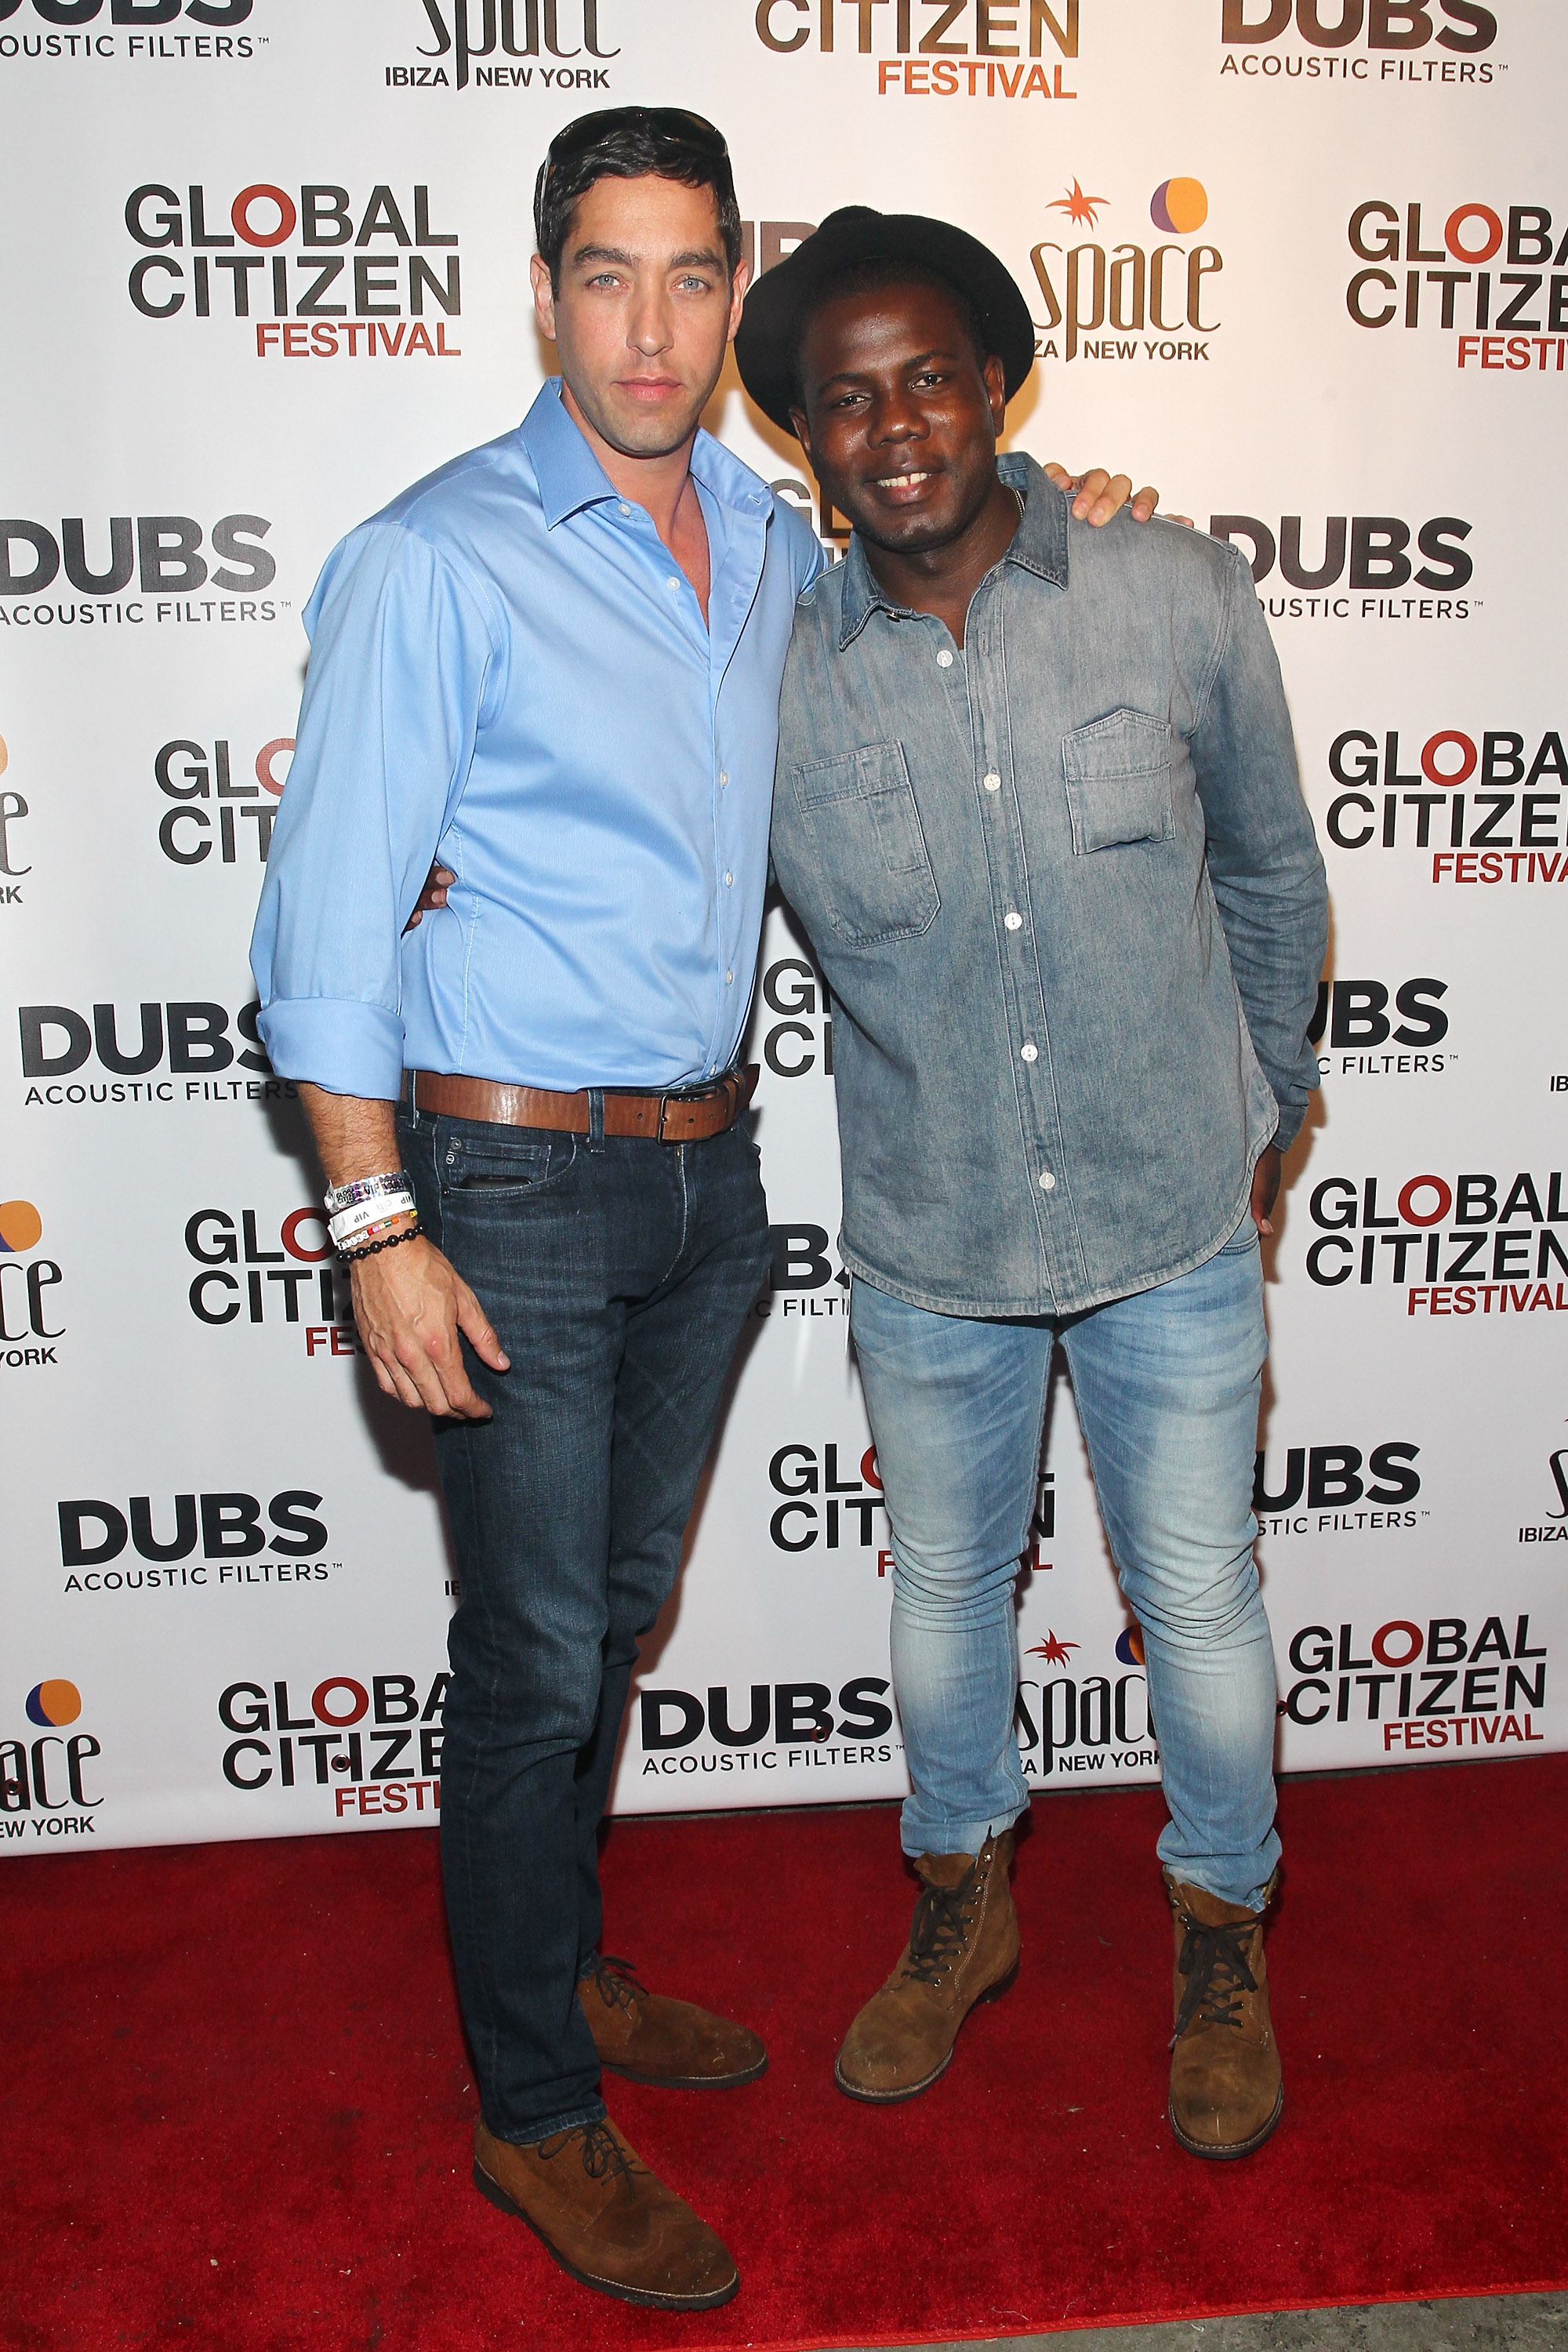 Actor Nick Loeb (L) and Kweku Mandela attend the Global Citizen Festival official after party at Space Ibiza NY